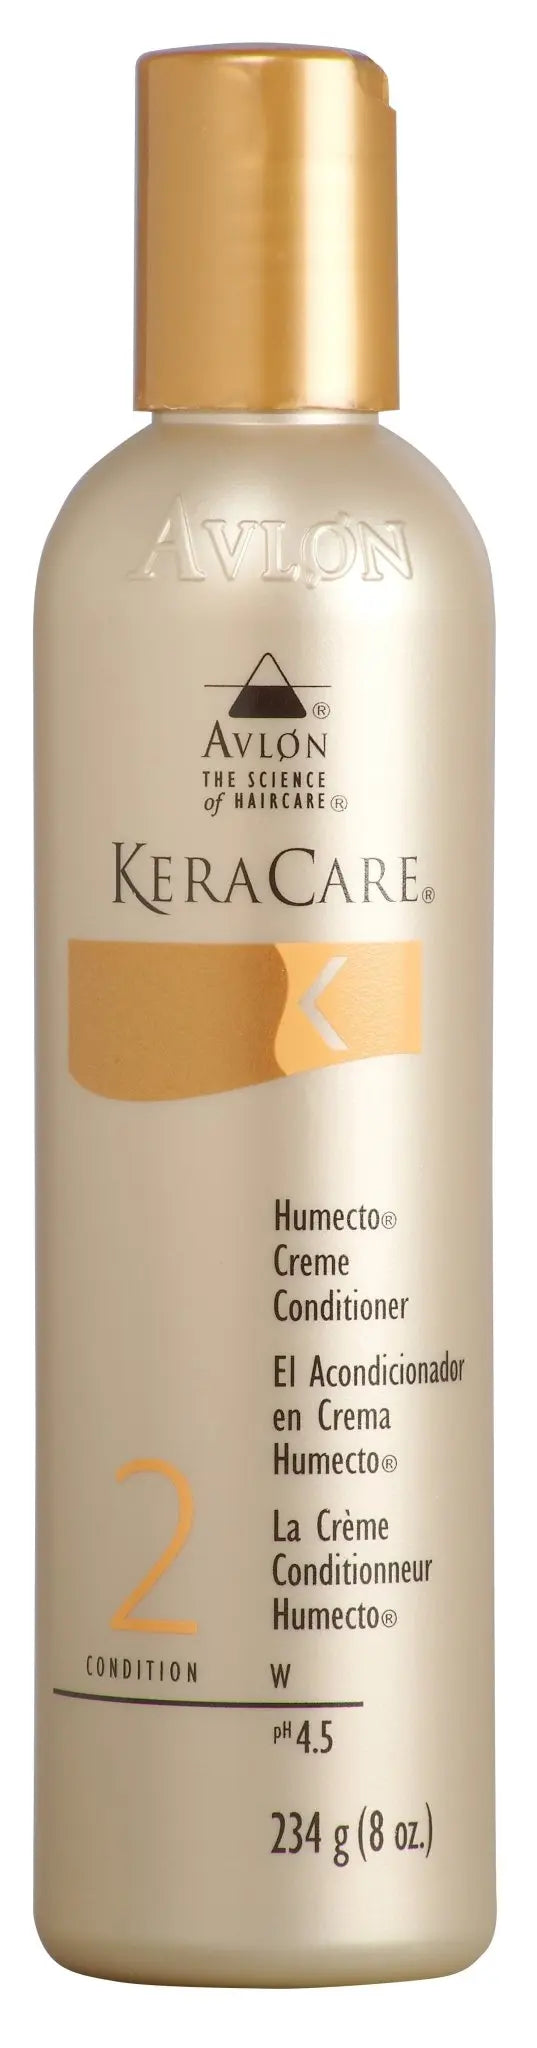 HUMECTO CREME CONDITIONER 240ML & 480ML - Our Concept Beauty